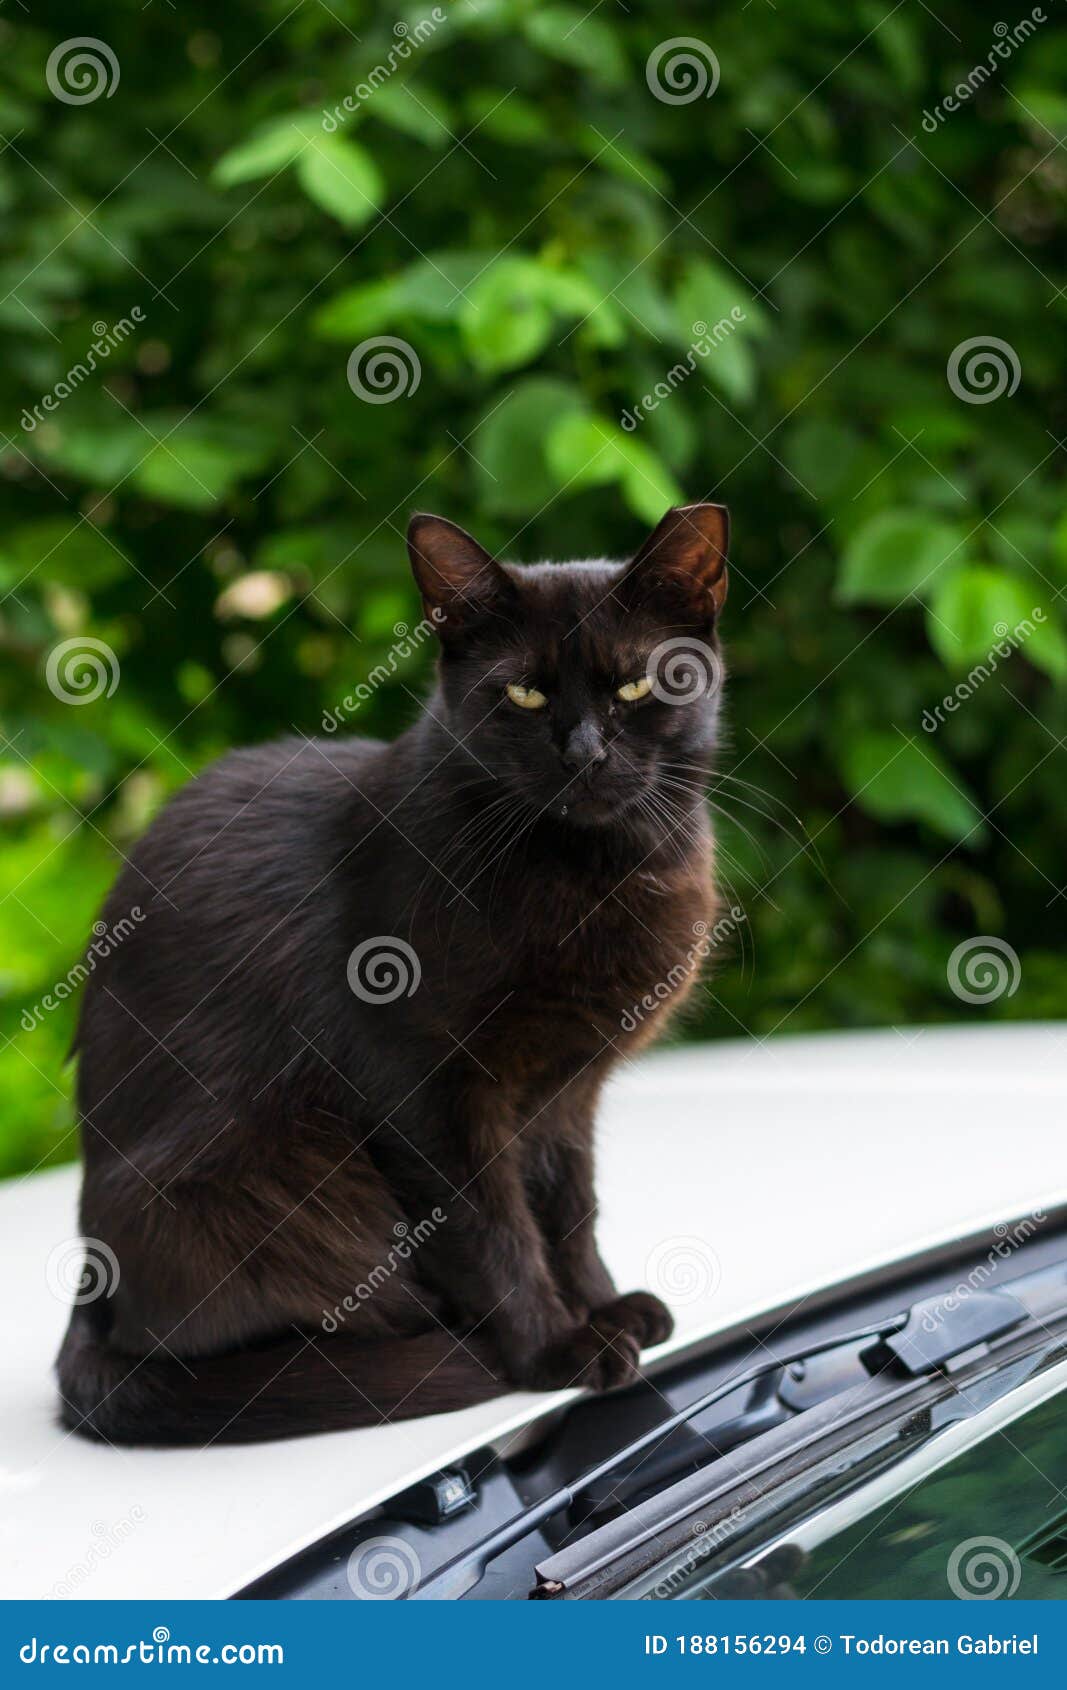 Black Cat With Cropped Ear Sitting On The Car. This Is Called “ear